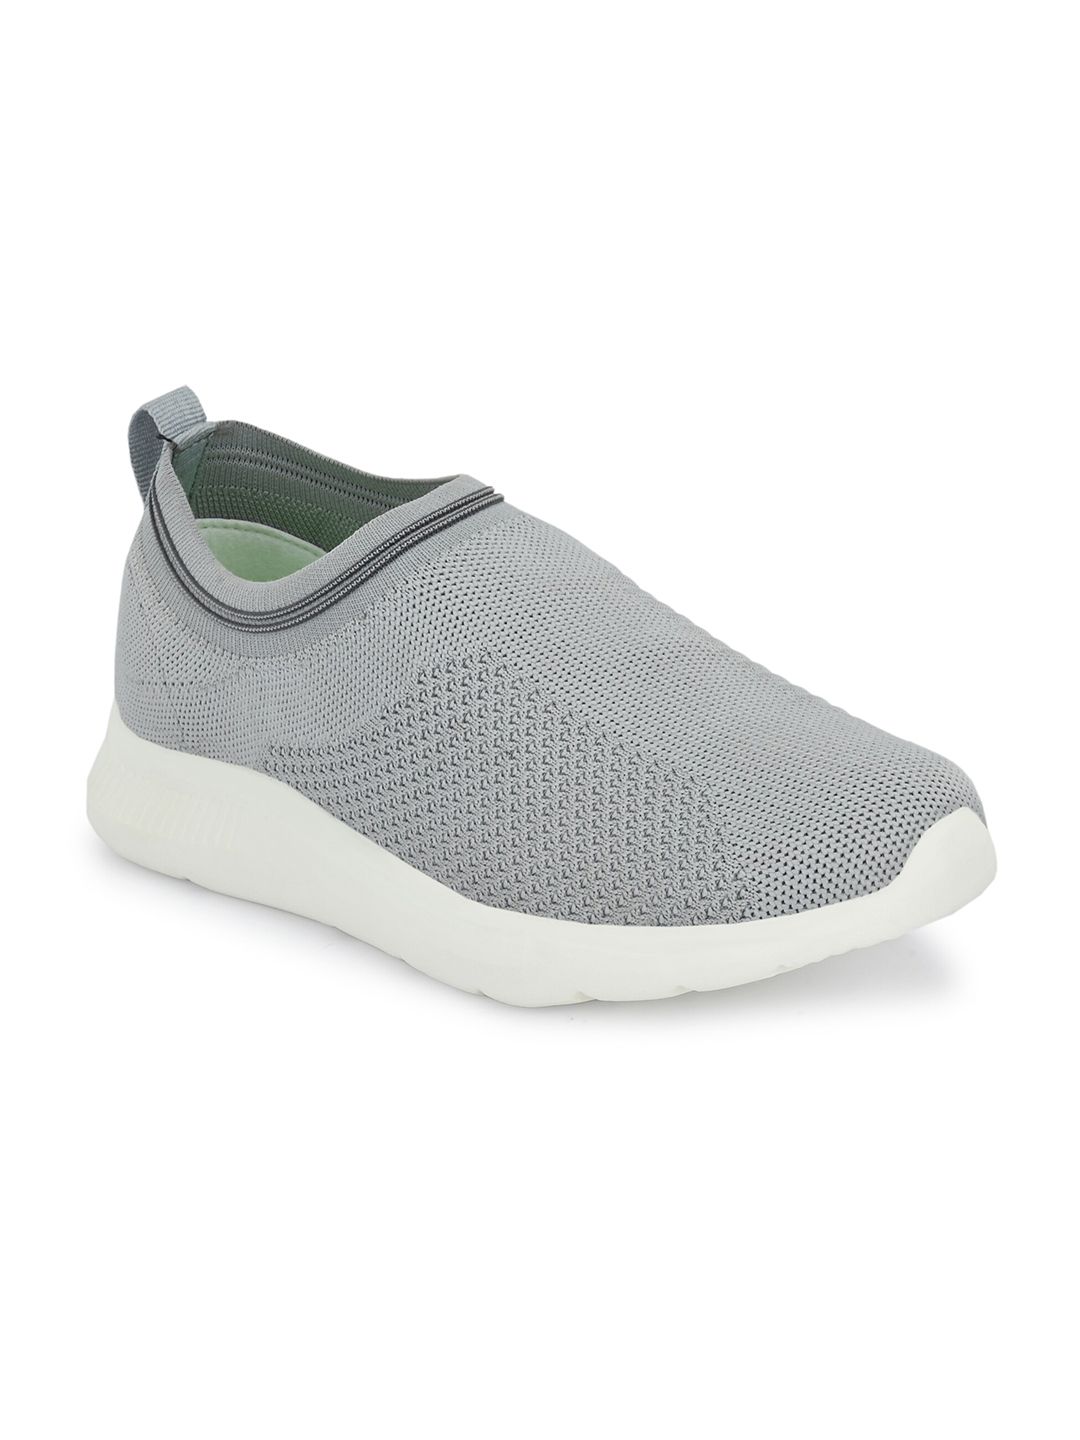 OFF LIMITS Women Grey Mesh Walking Non-Marking Shoes Price in India